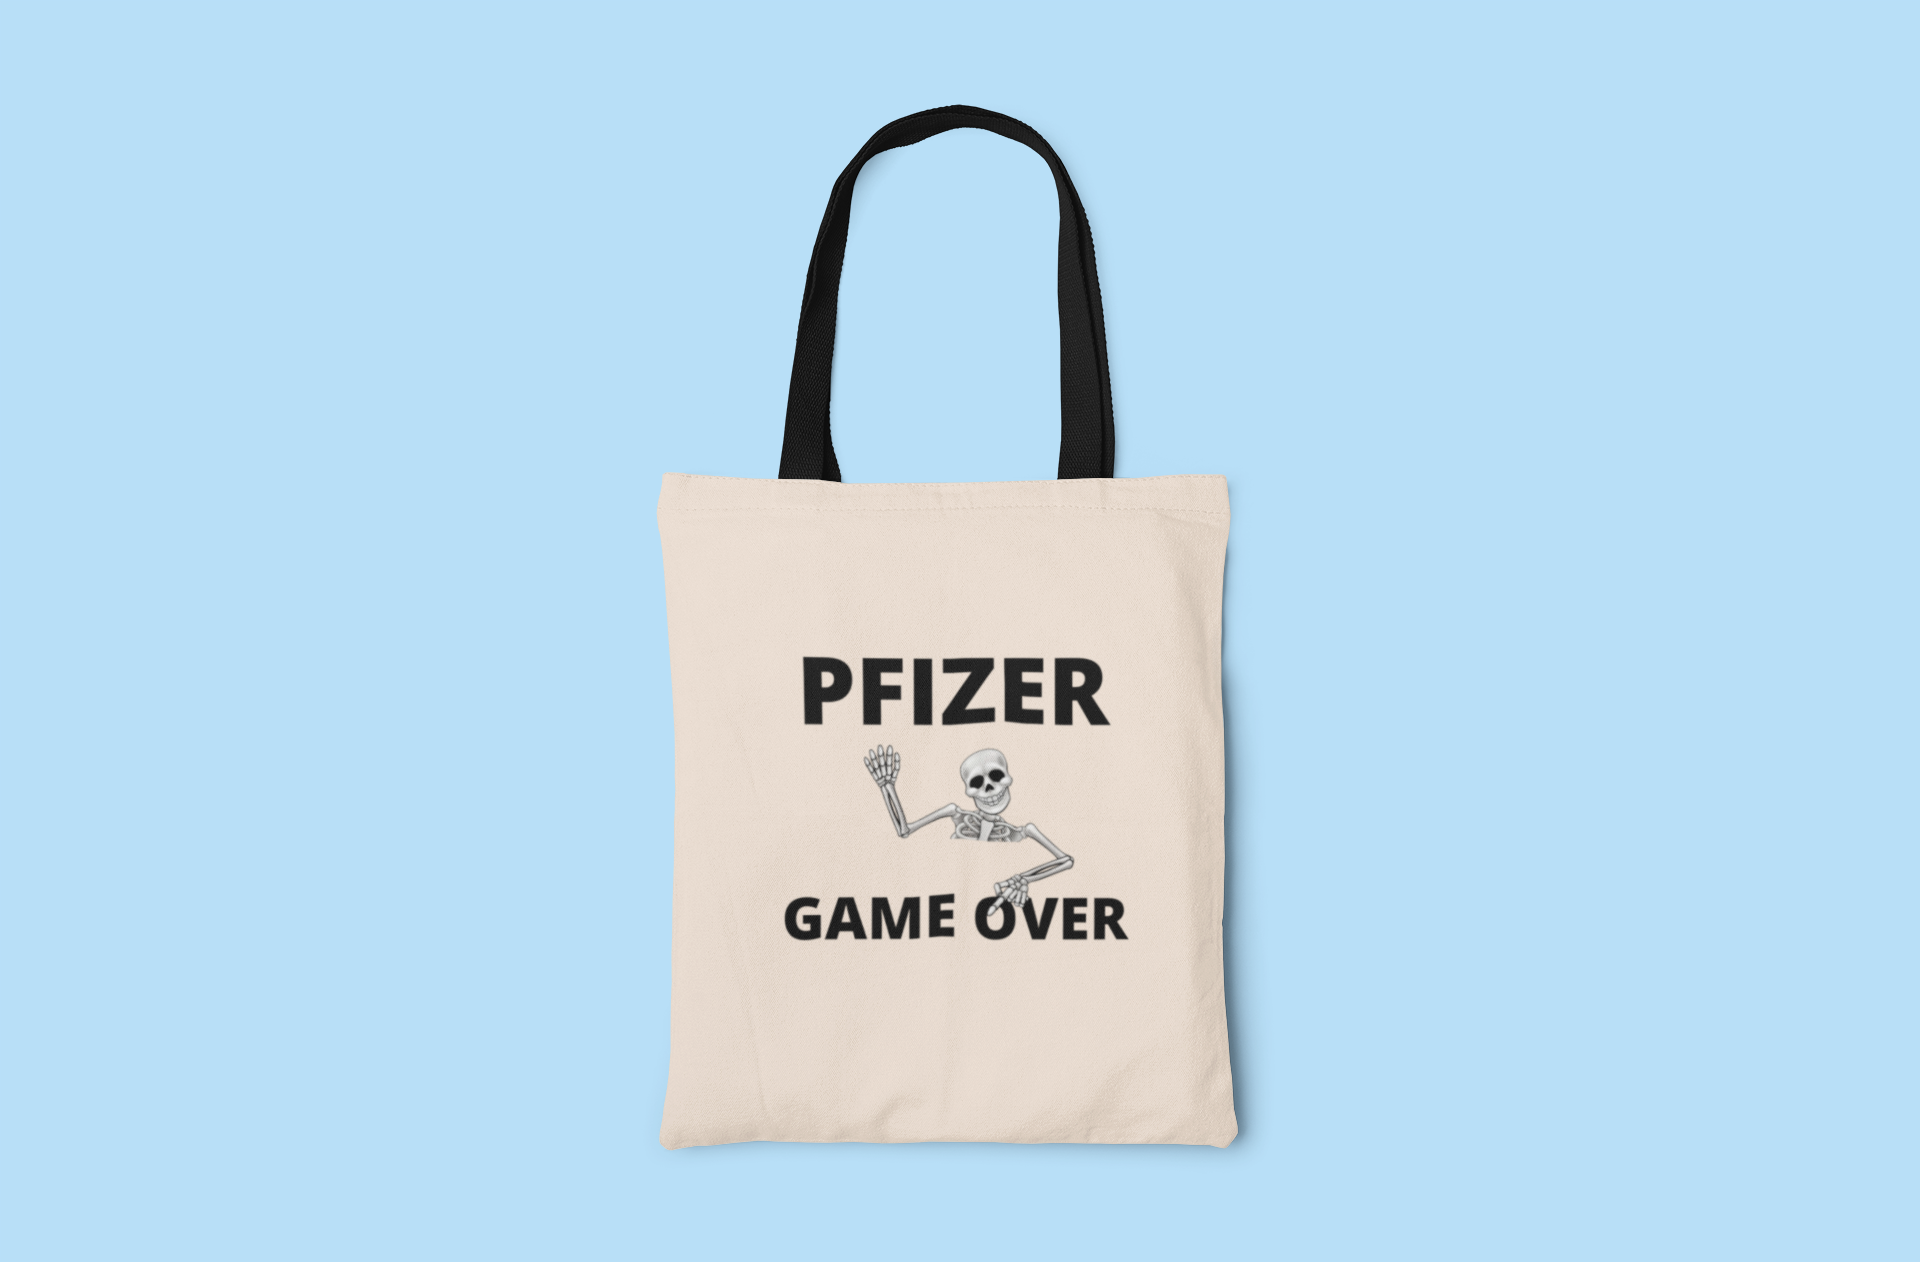 Pfizer Game Over Tote Bag